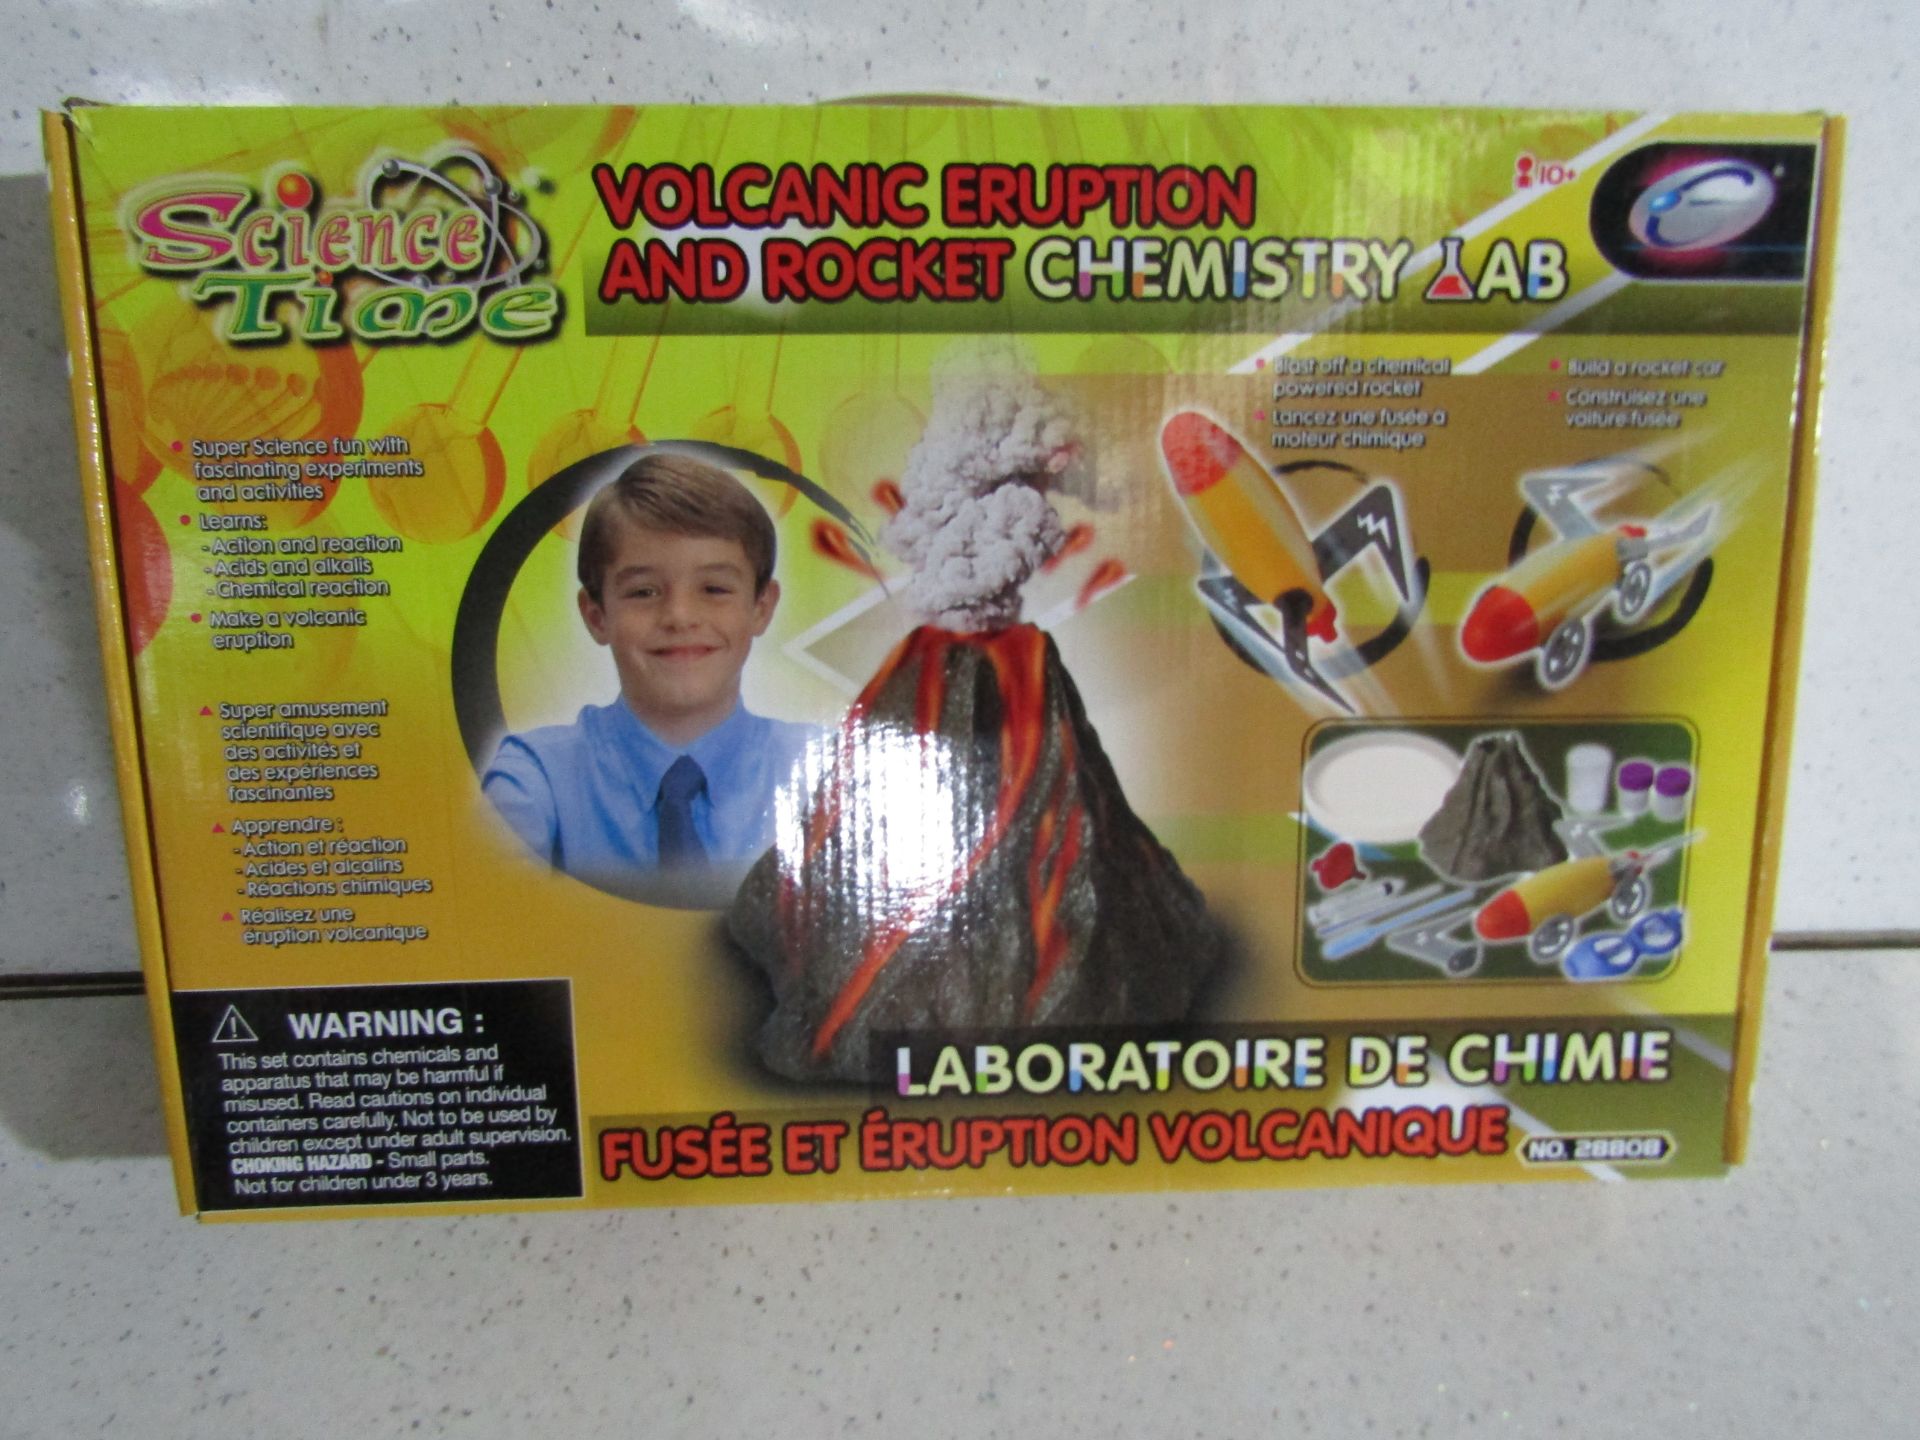 Science Time - Volcanic Eruption & Rocket Chemistry Lab - Boxed.